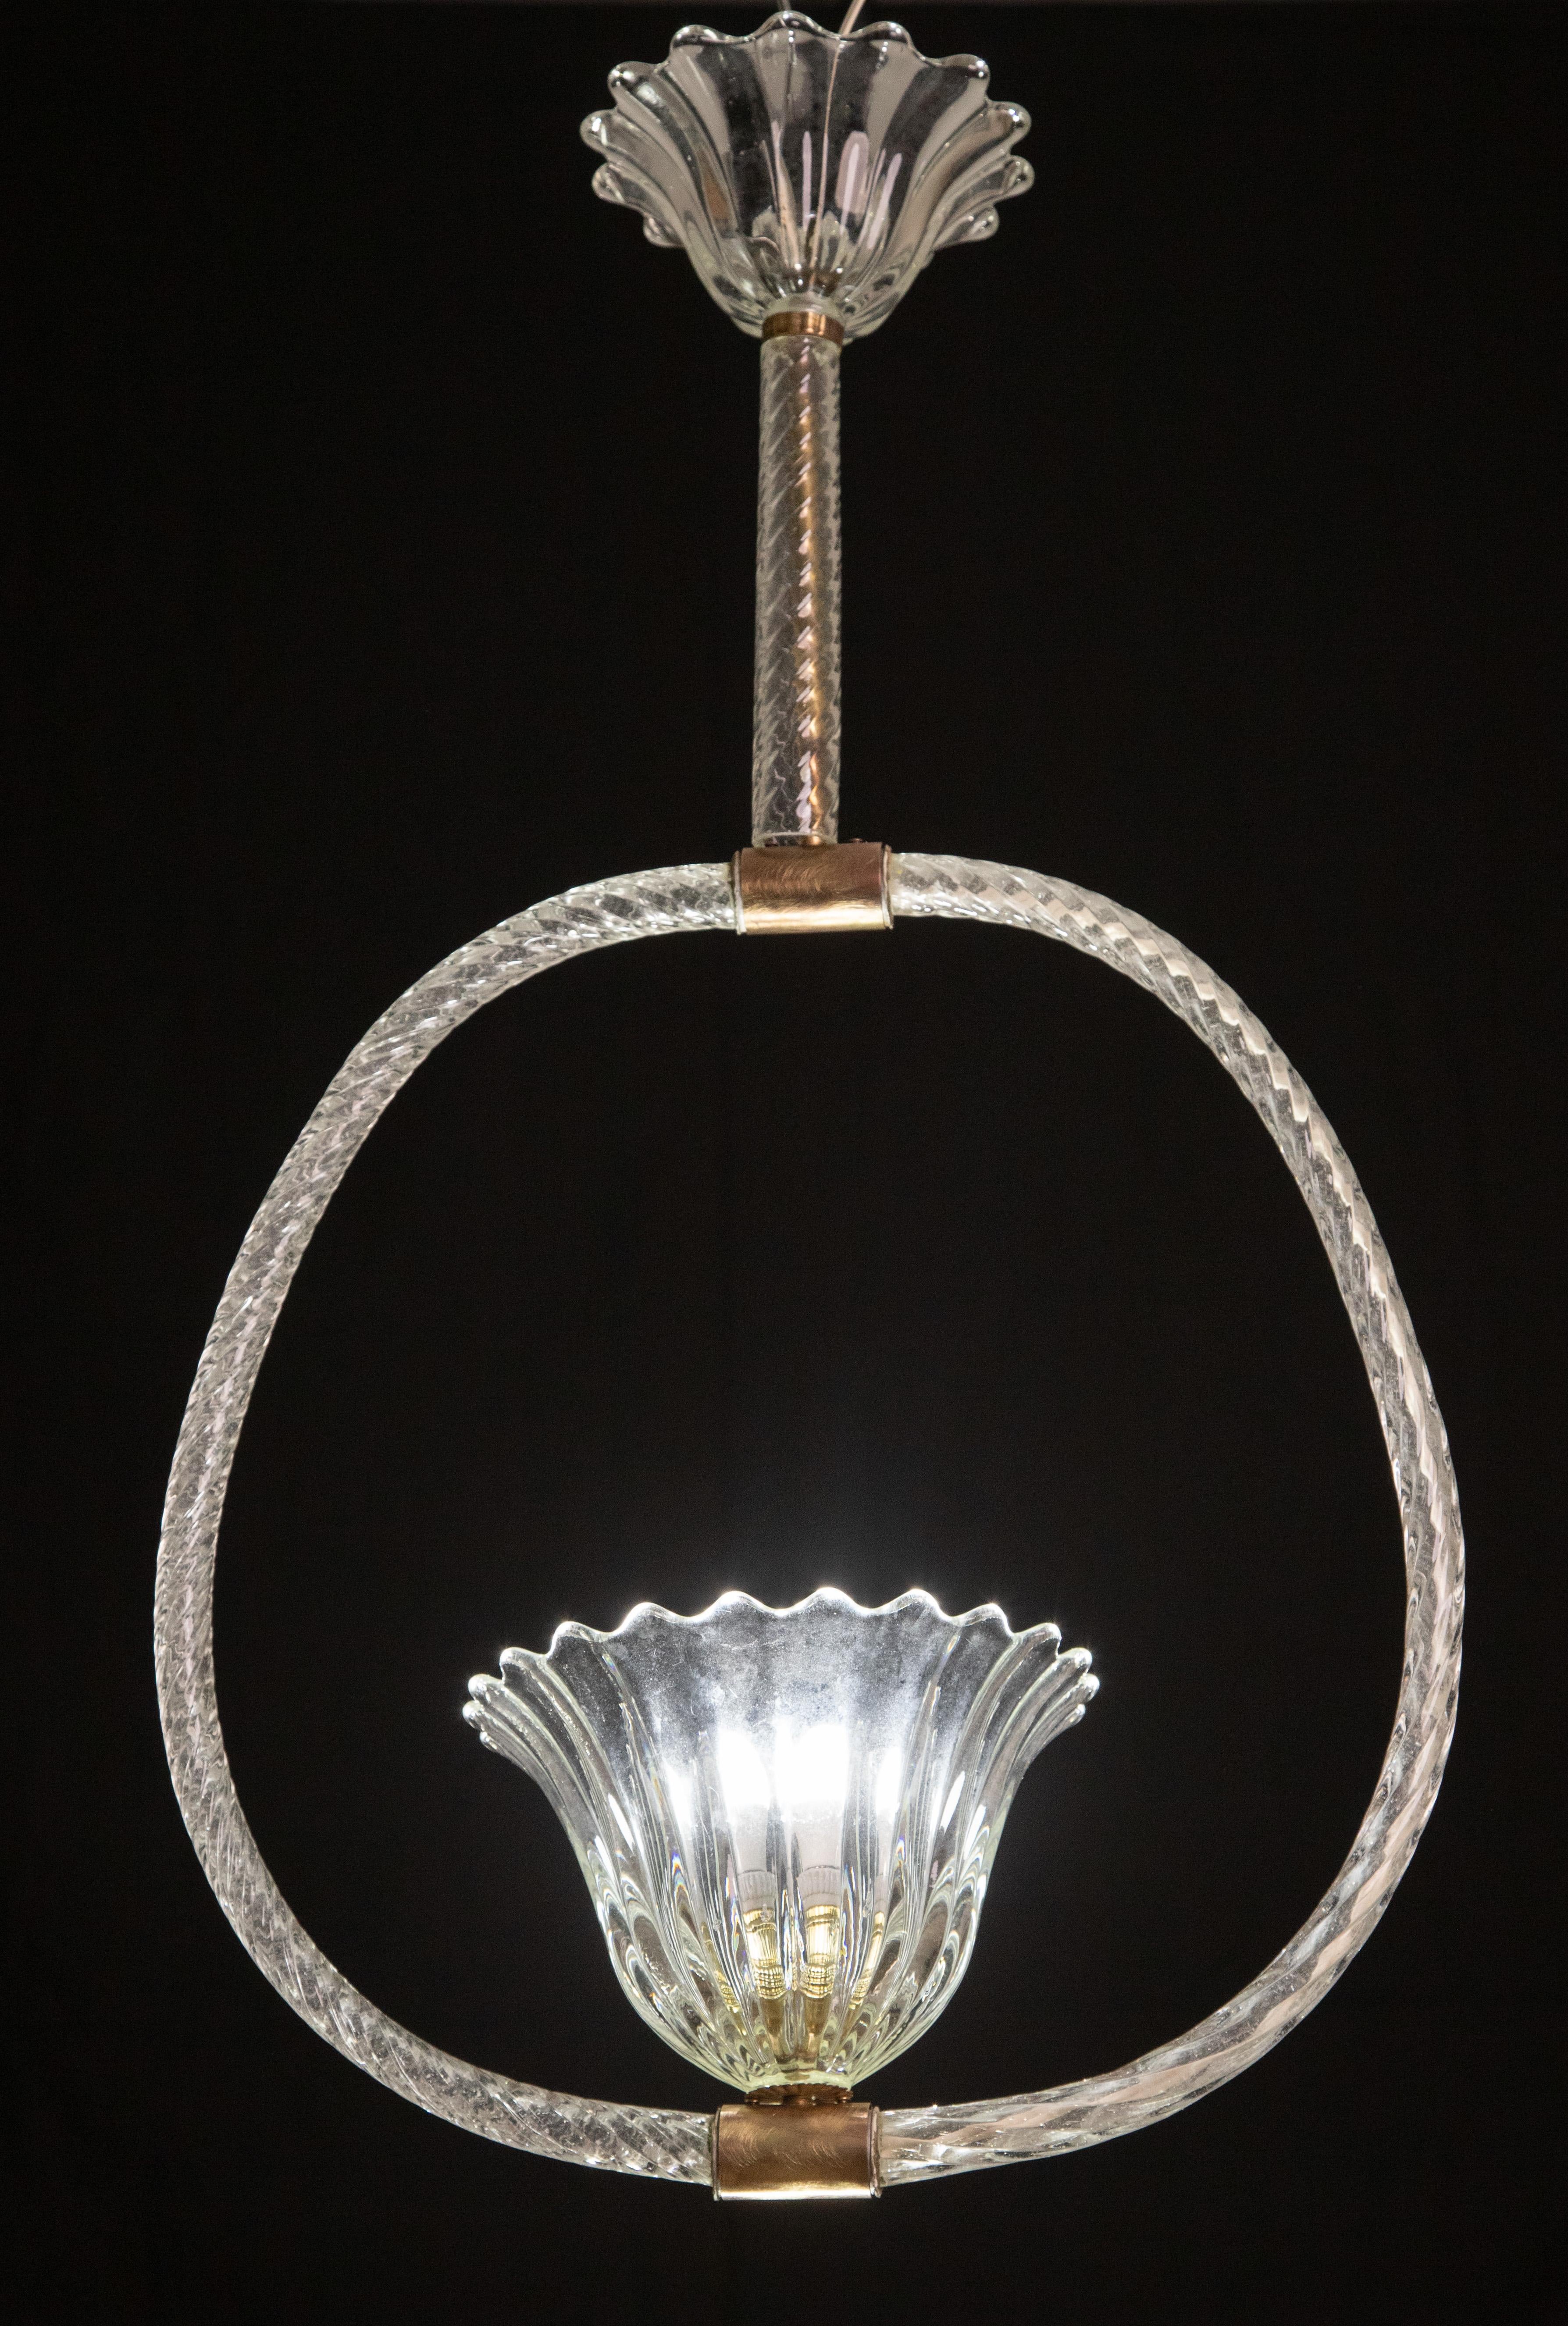 Stunning and unique rare pair of Barovier and Toso pendants.
Set of 2 small pendant lamp by Barovier & Toso, hand-blown, with brass fittings. The chandelier is 76 cm high, 43 cm wide.
The fixture requires a European E27 / 110 Volt Edison bulb, up